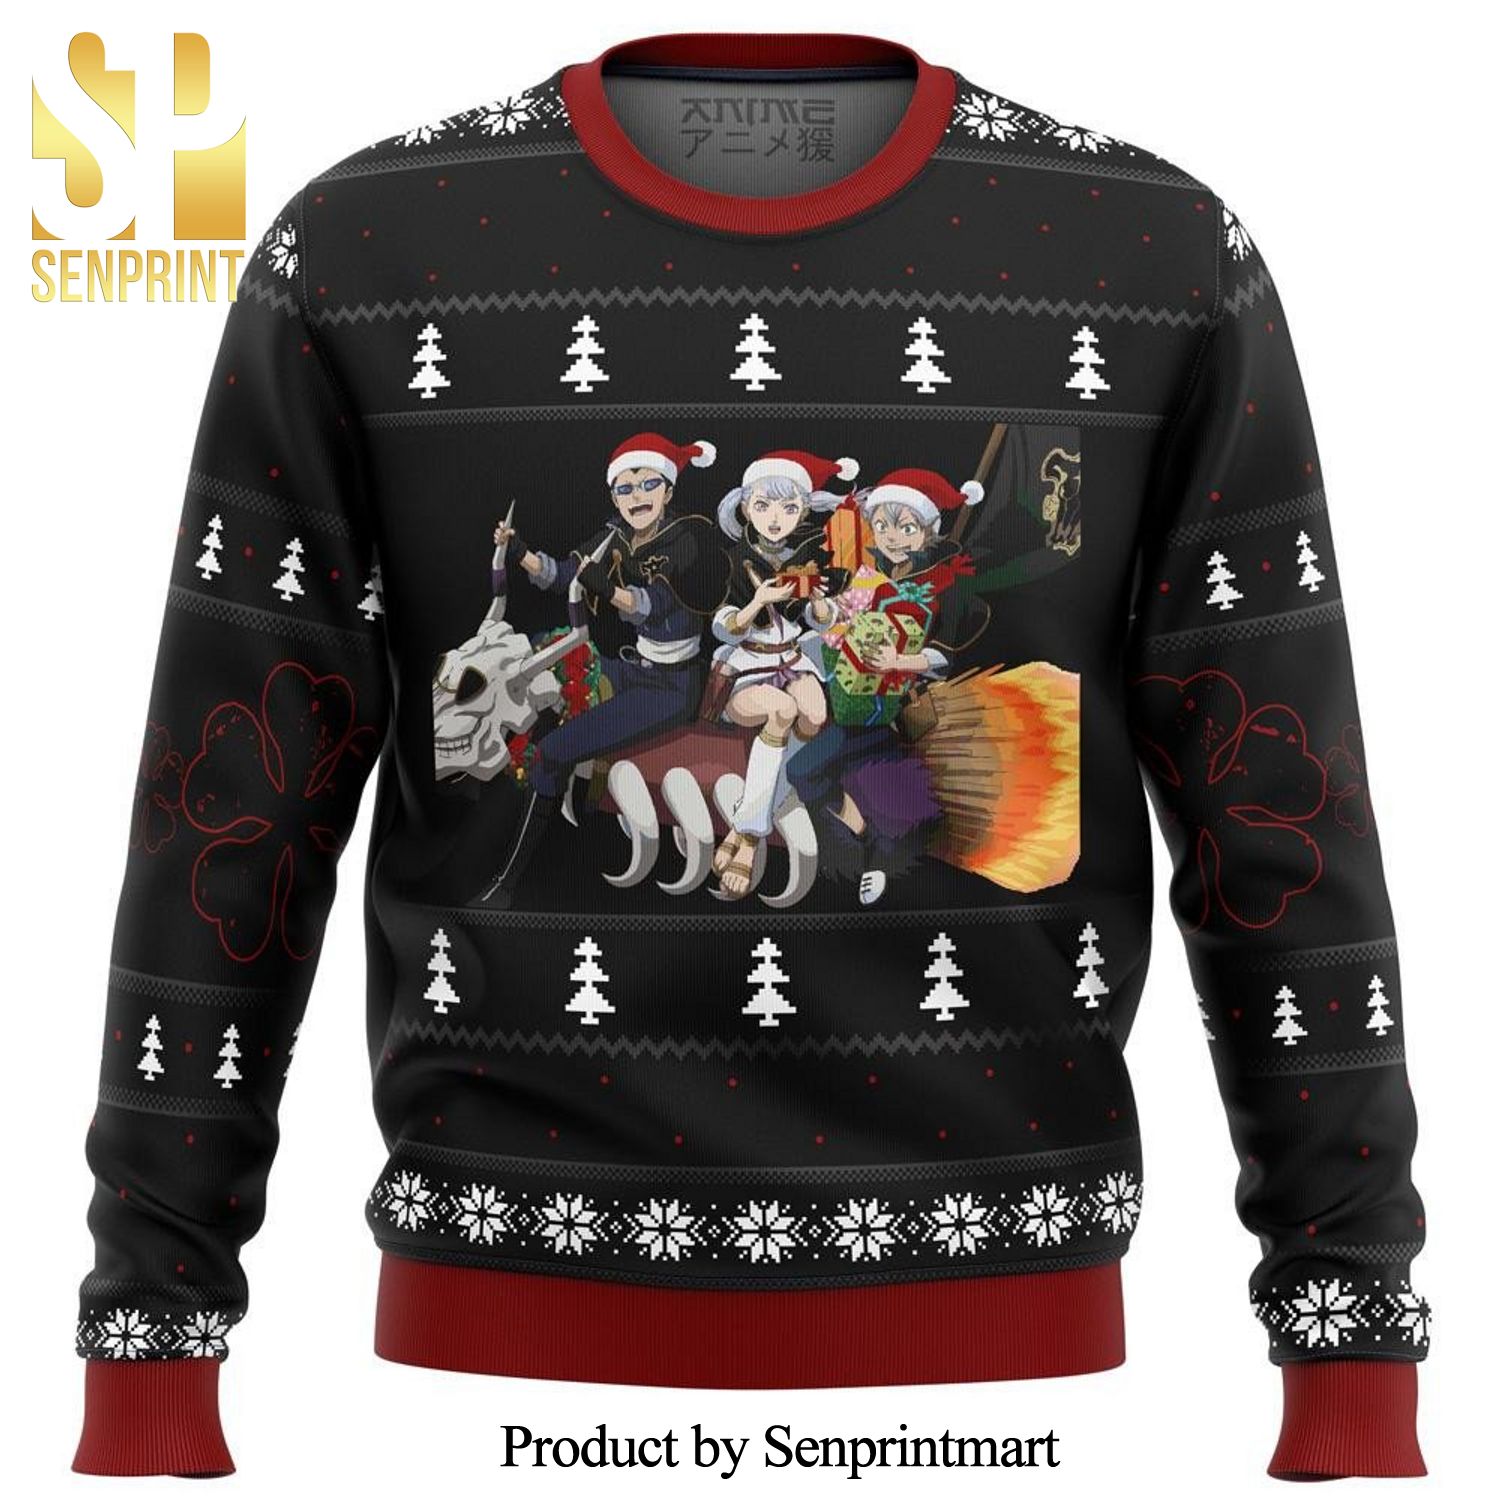 Black Clover Holiday Knitted Ugly Christmas Sweater